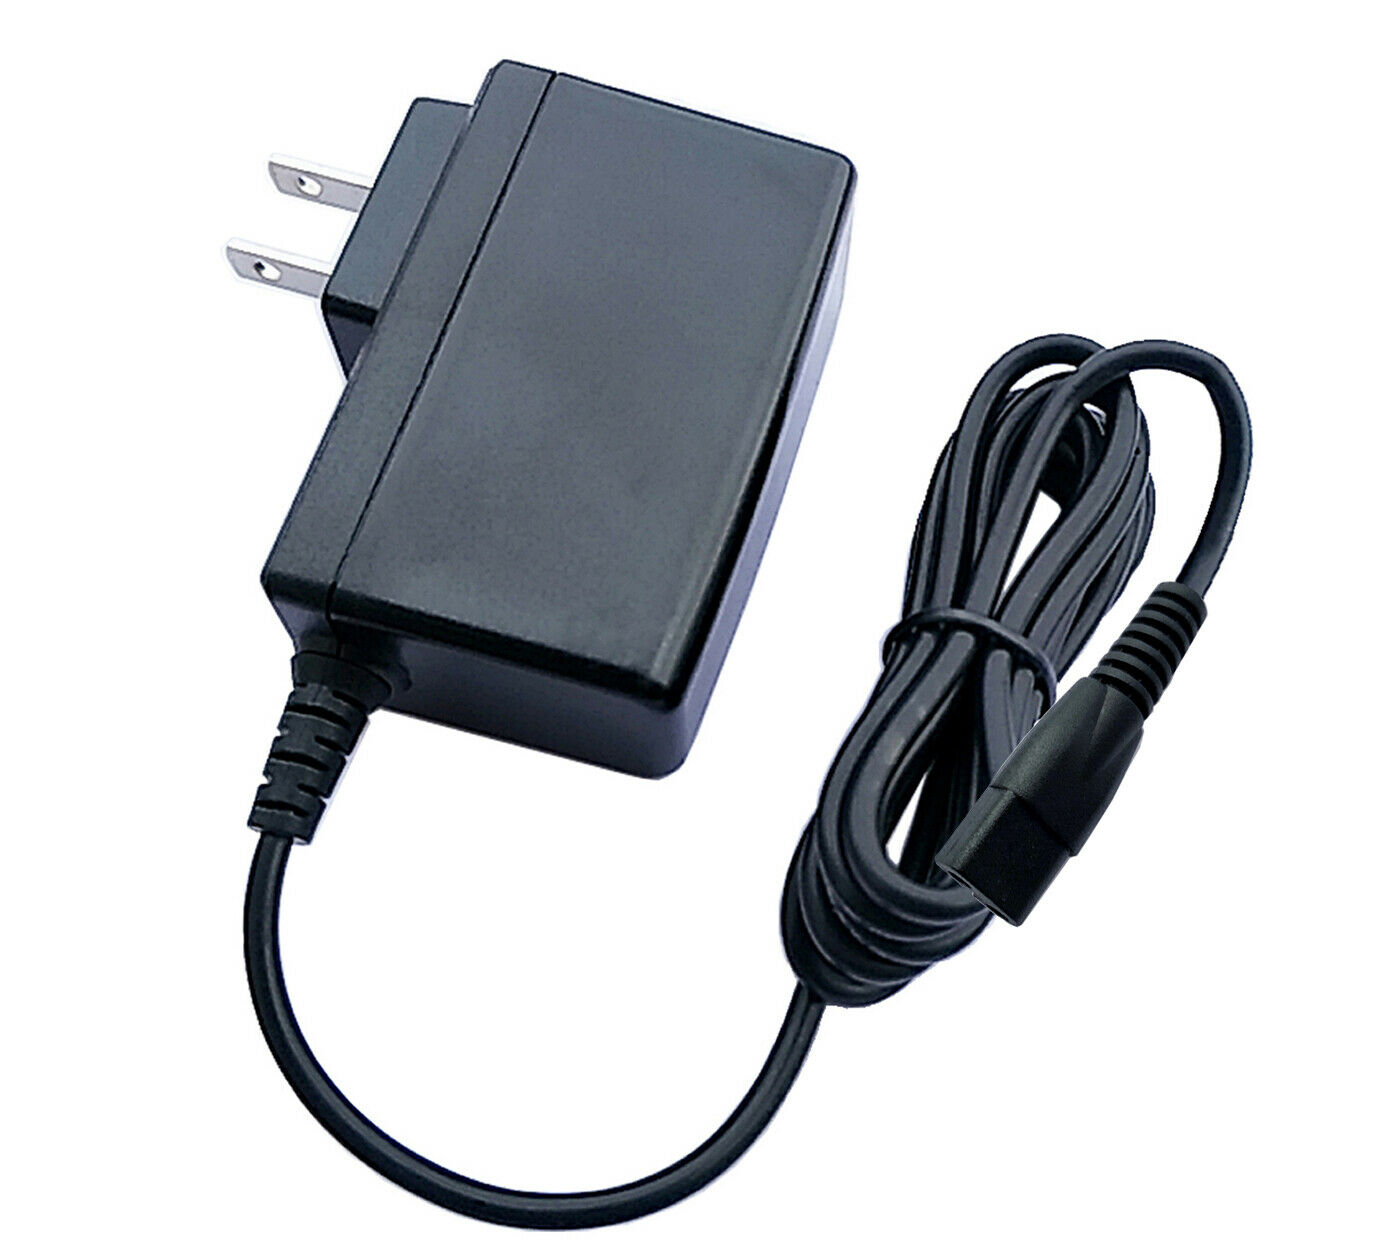 AC Charger Adapter For Tascam GPE248-120200-Z GPE248-120200-1 2 3 4 Power Supply Specifications: Type: AC to DC Standar